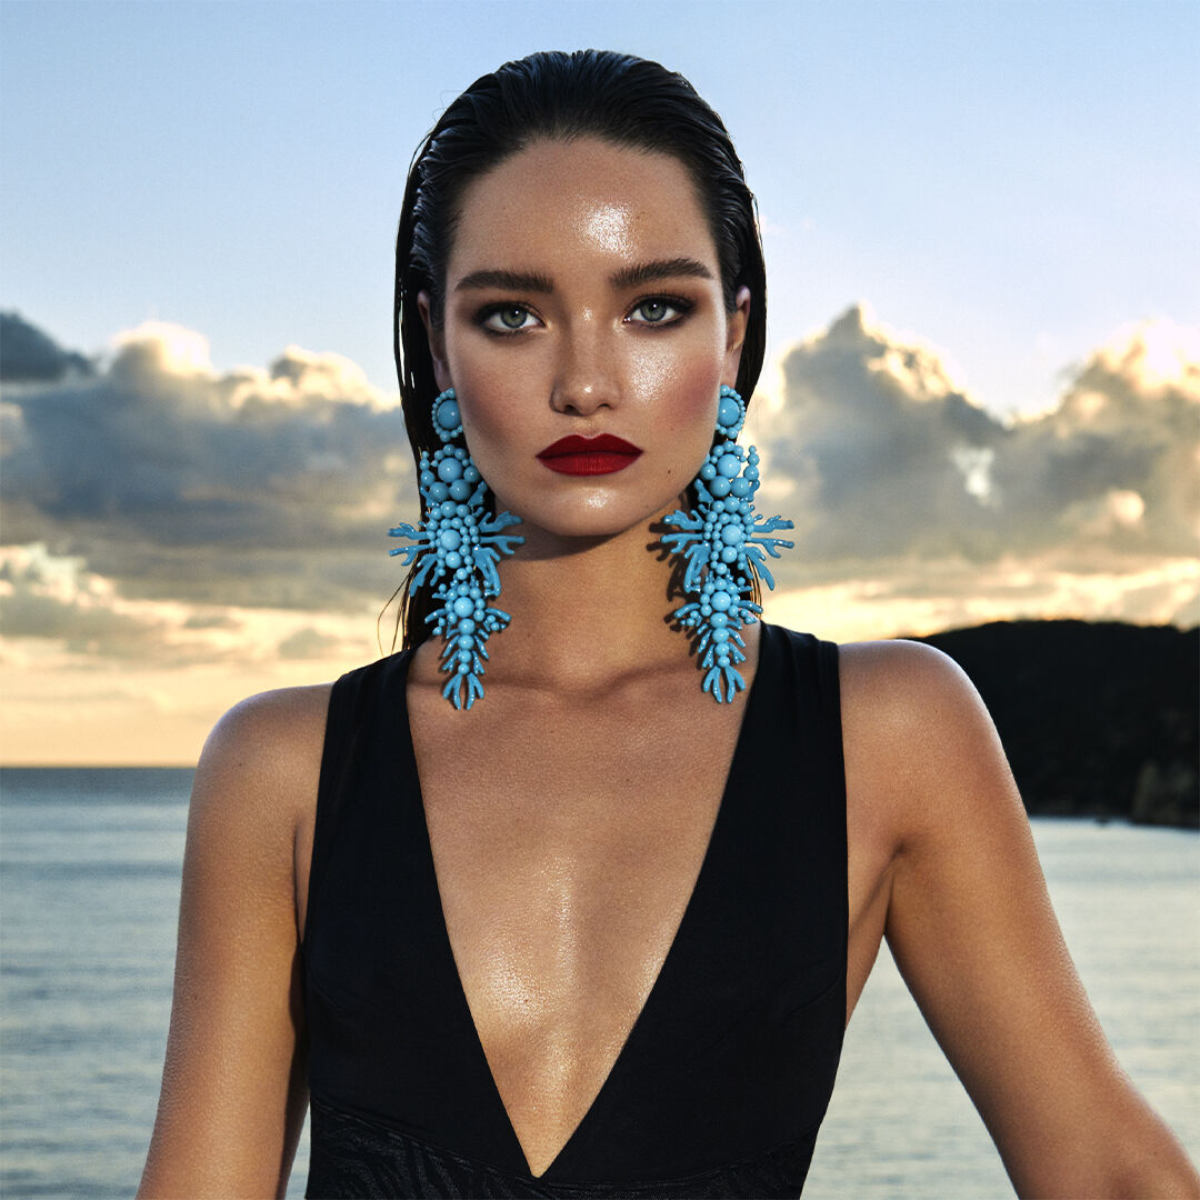 Aquazzura Presents Its New Spring/Summer 2022 Fashion Jewelry Collection